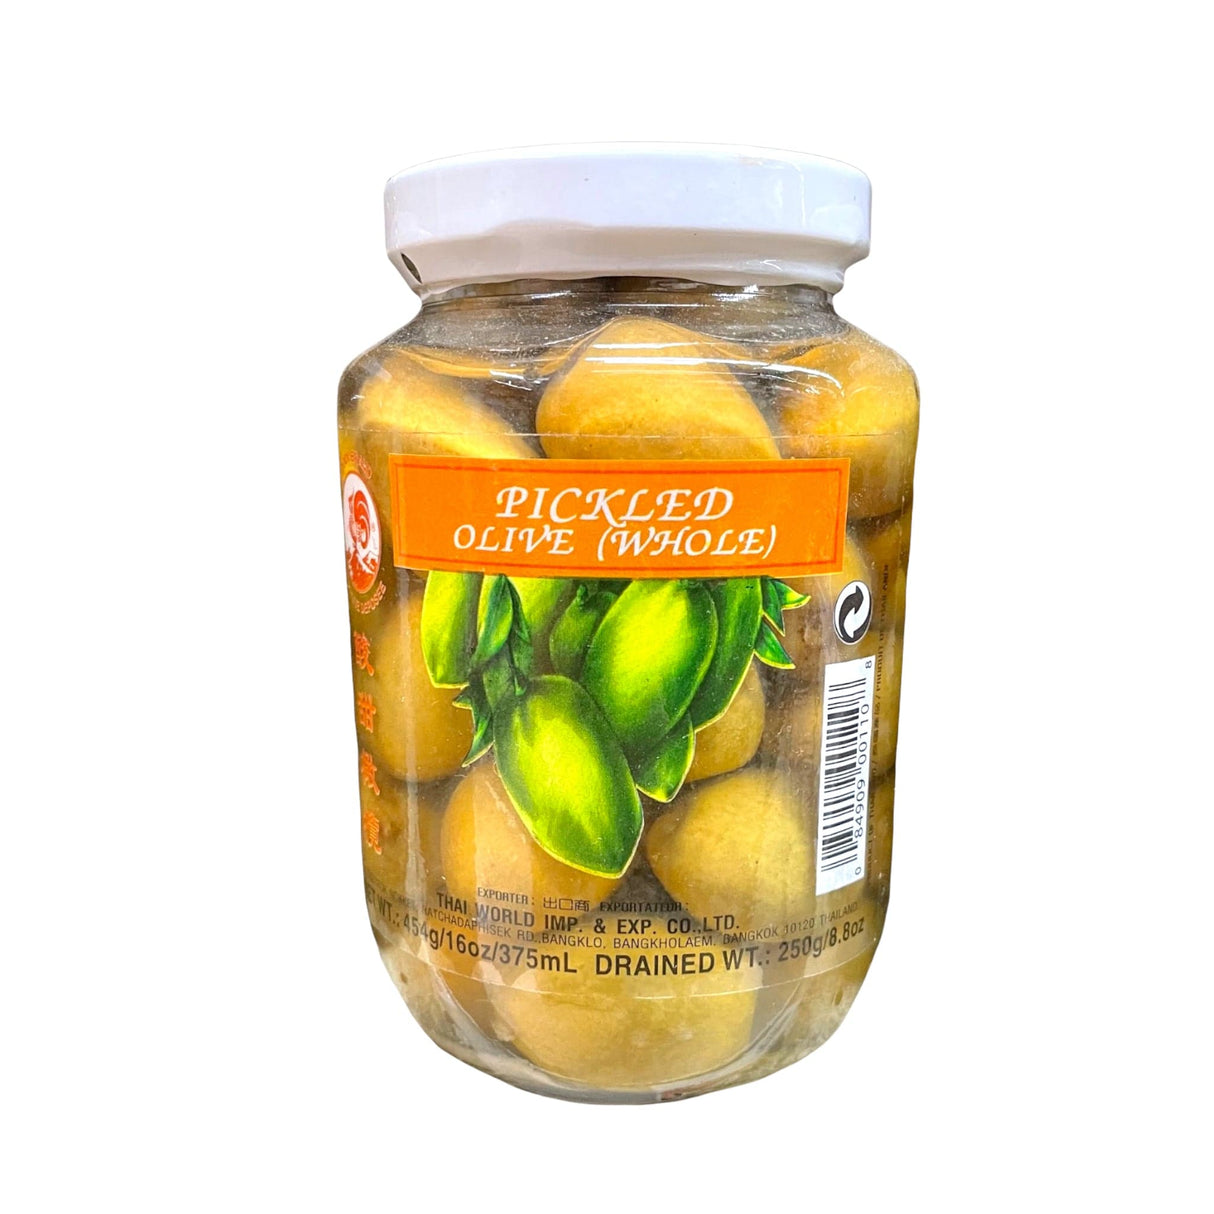 Cock Brand Pickled Olive (Whole)